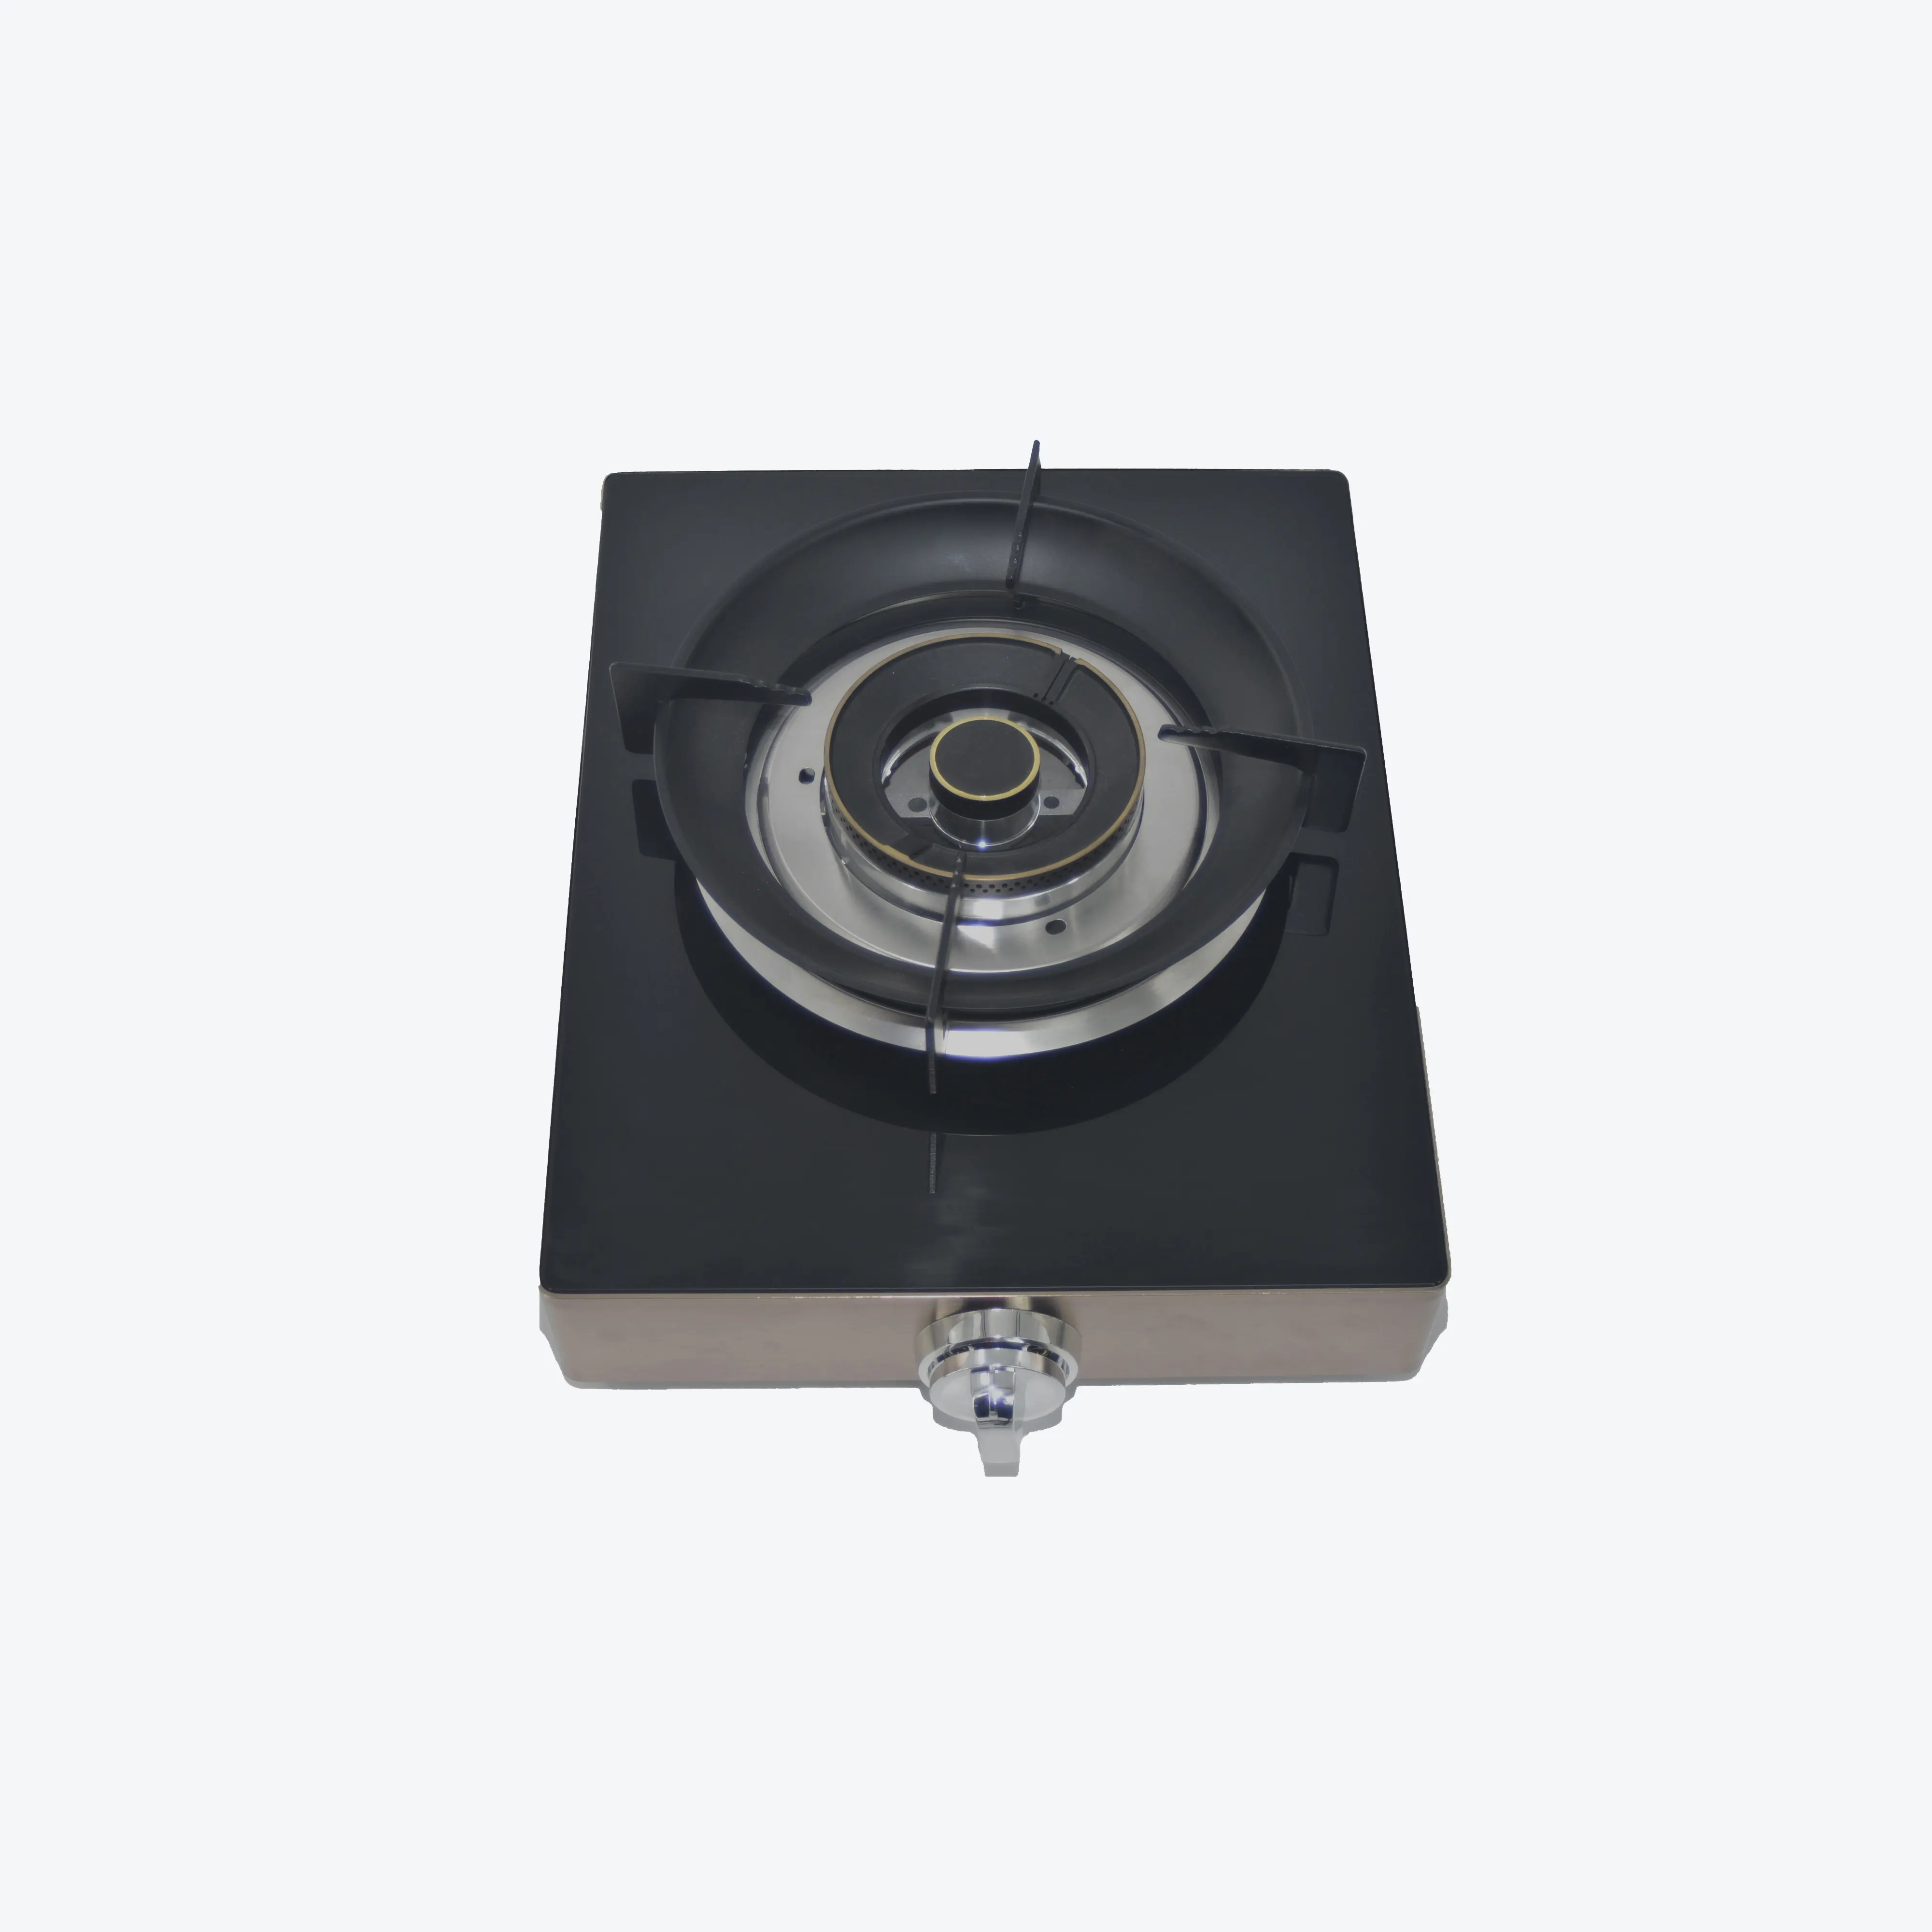 High-Power 1 Burner Commercial Gas Cooktop Unembroidered Steel Surface Stove Gas Burner Cup Battery Cup Surface Protection